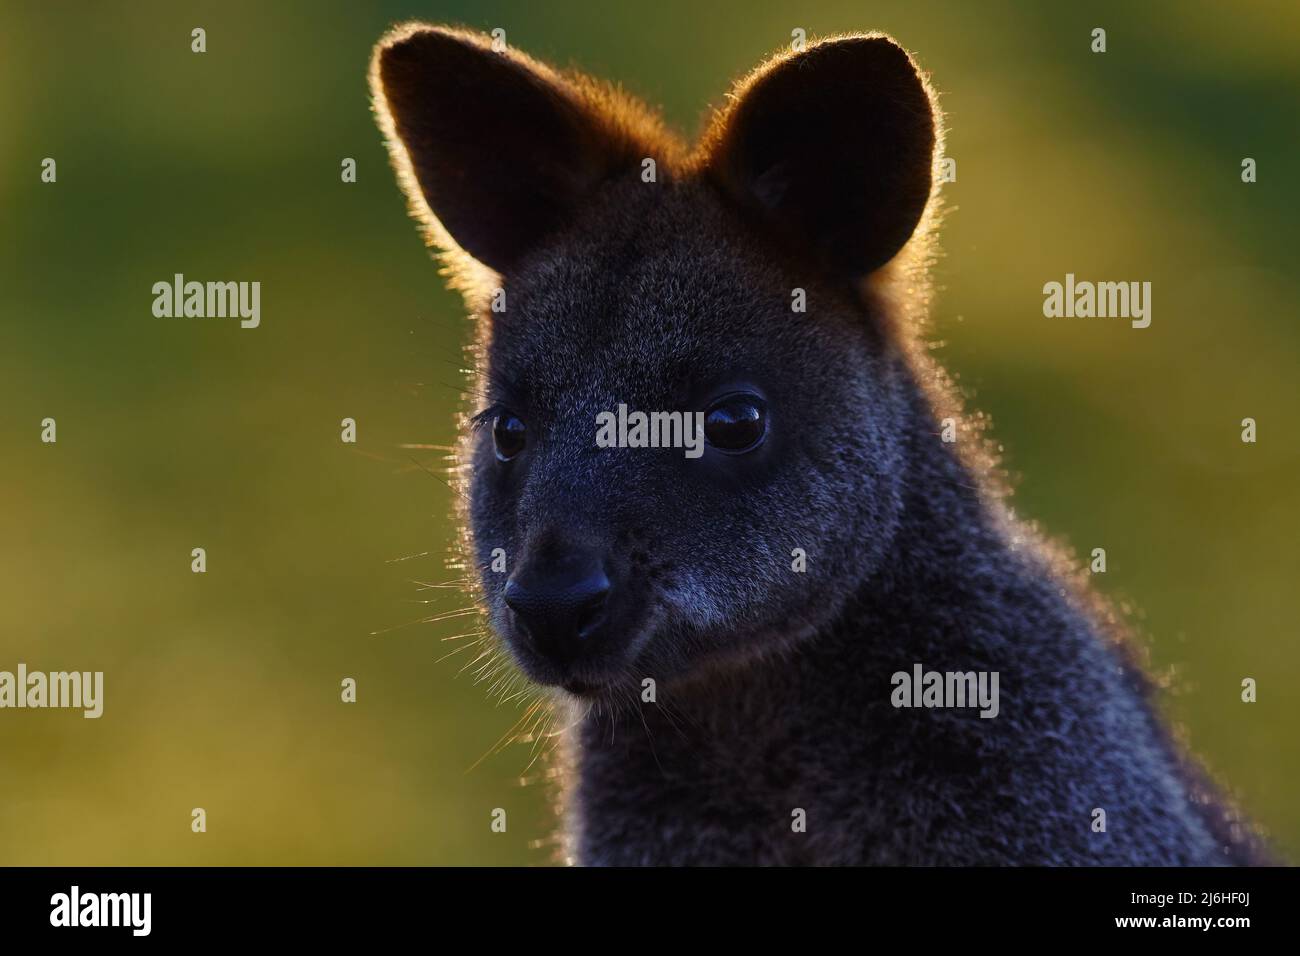 Swamp wallaby, Wallabia bicolor, is a small macropod marsupial of eastern Australia, this kangaroo is also commonly known as the black wallaby, beauti Stock Photo